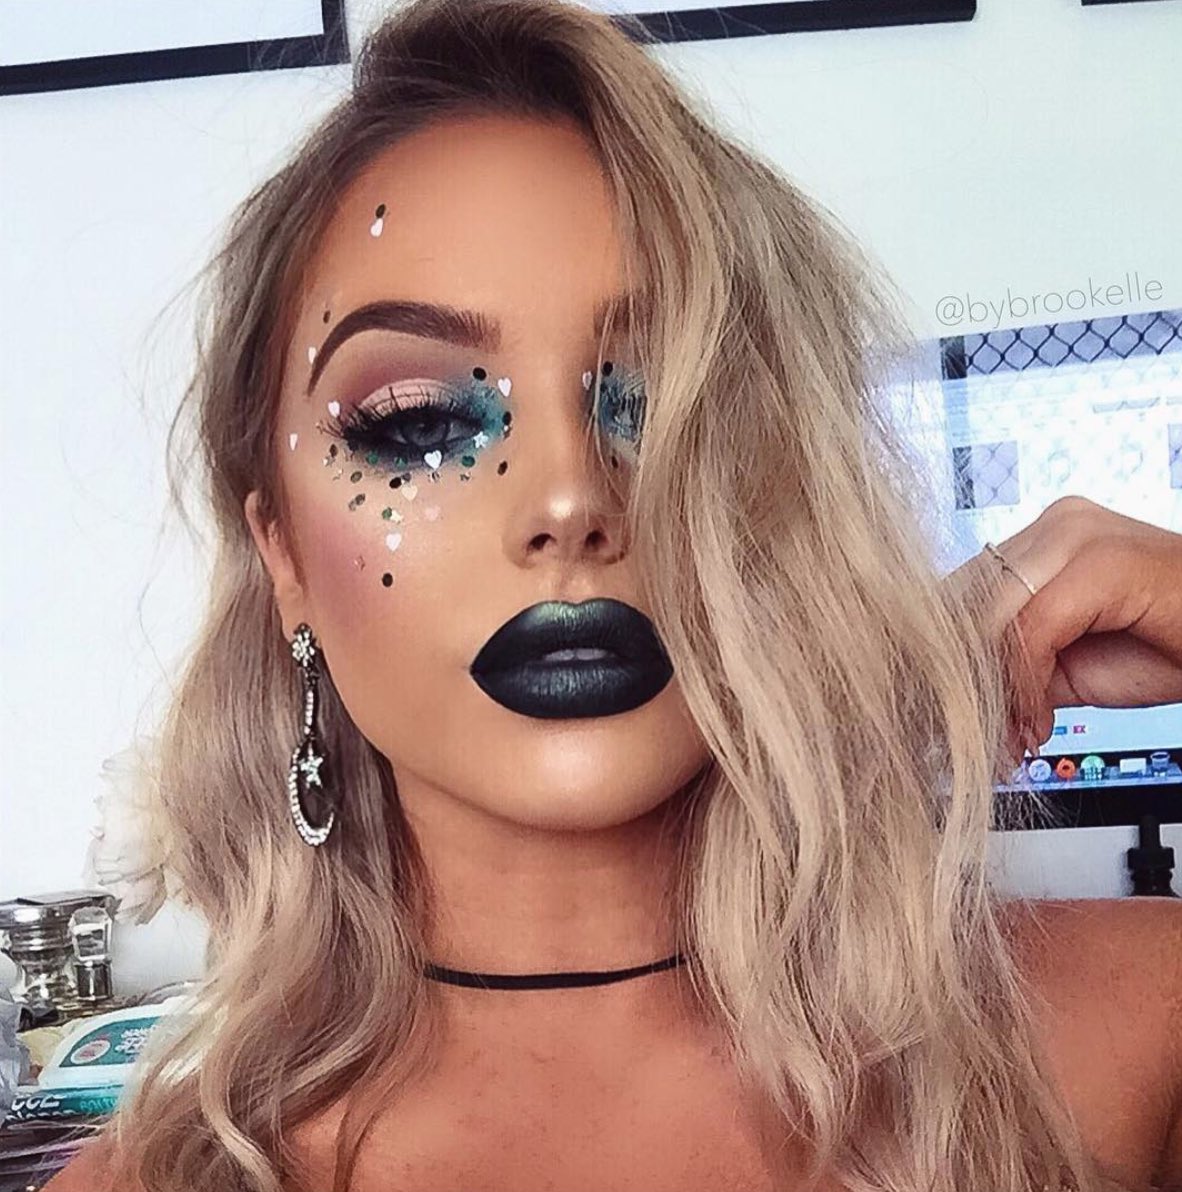 The Space Makeup Trend Taking Over Instagram